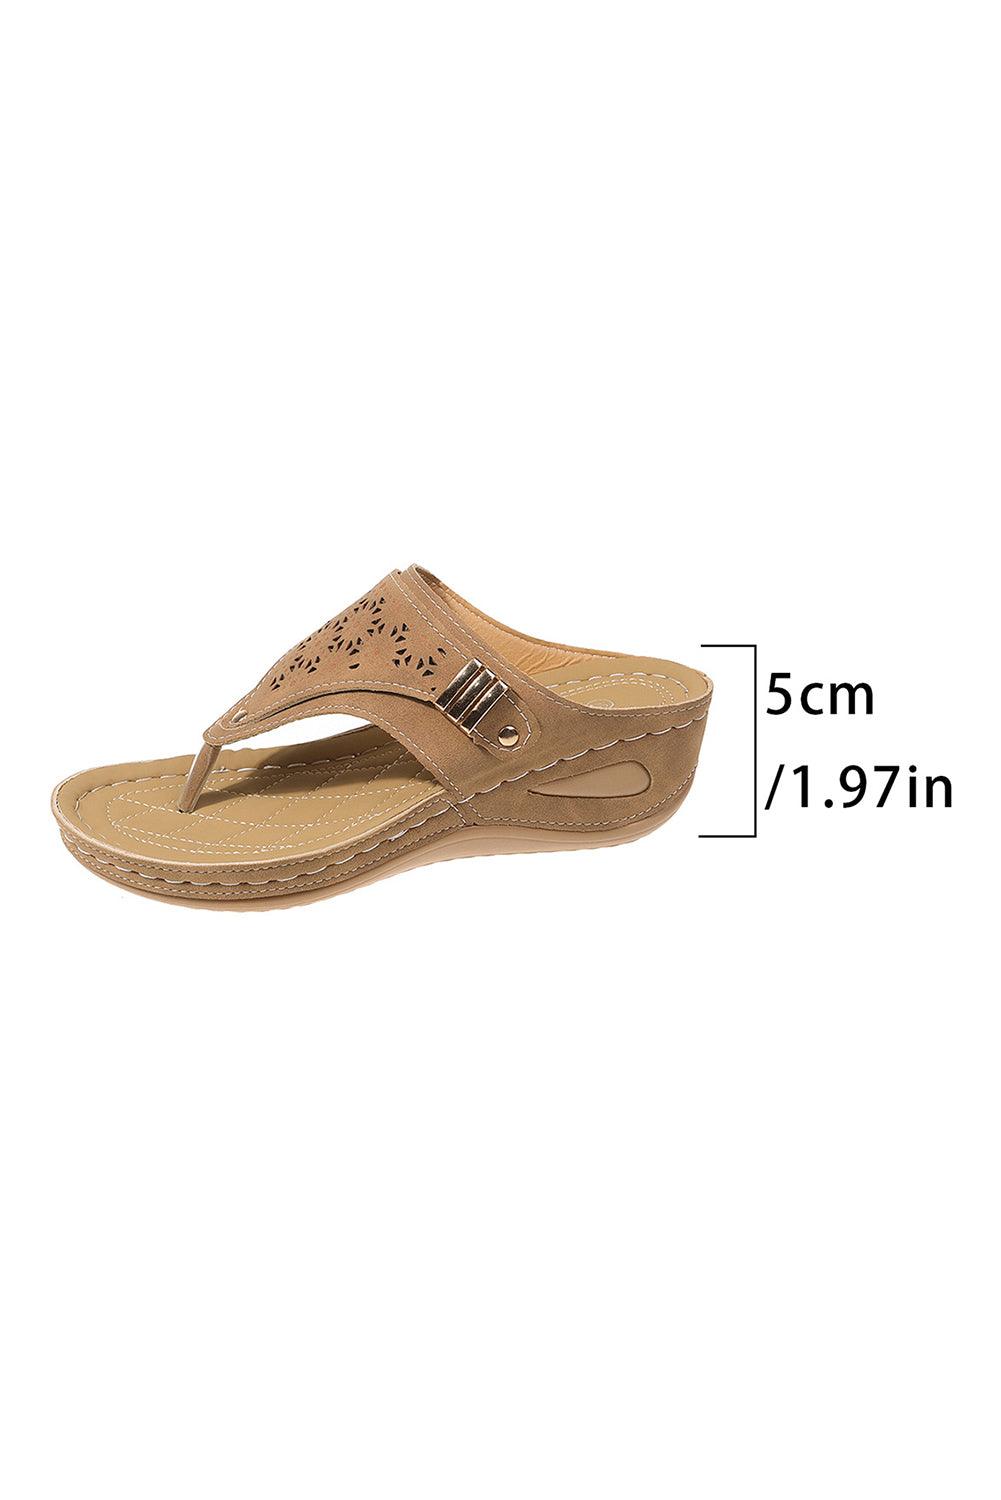 Chestnut Hollow Out Clip Toe Wedge Slippers - L & M Kee, LLC